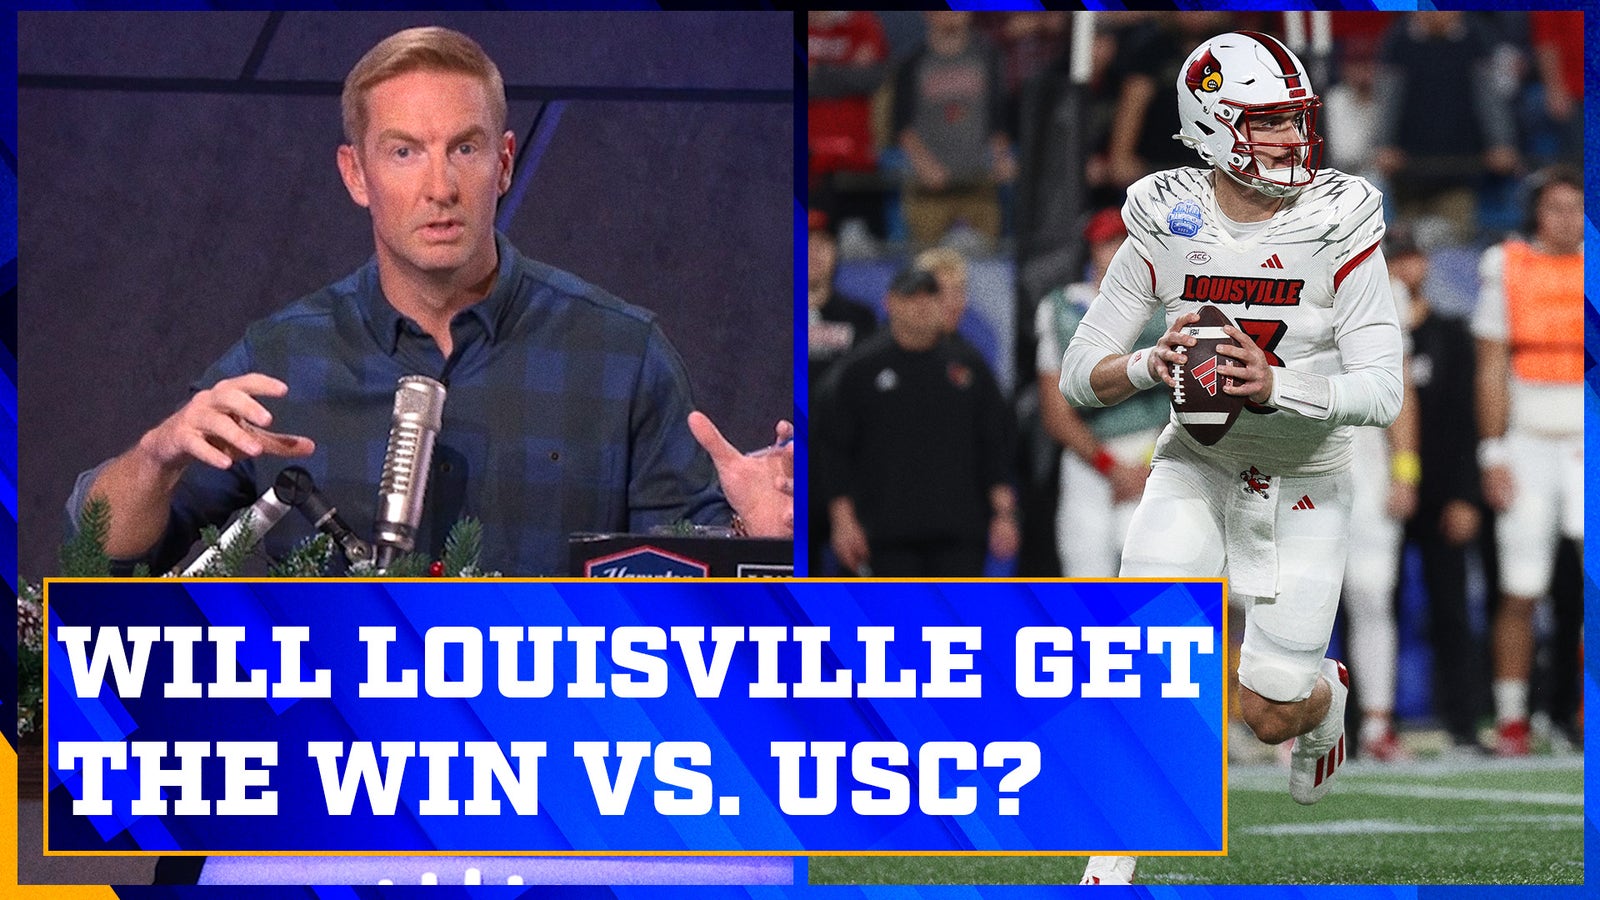 Will Louisville earn a win over USC in the Holiday Bowl?